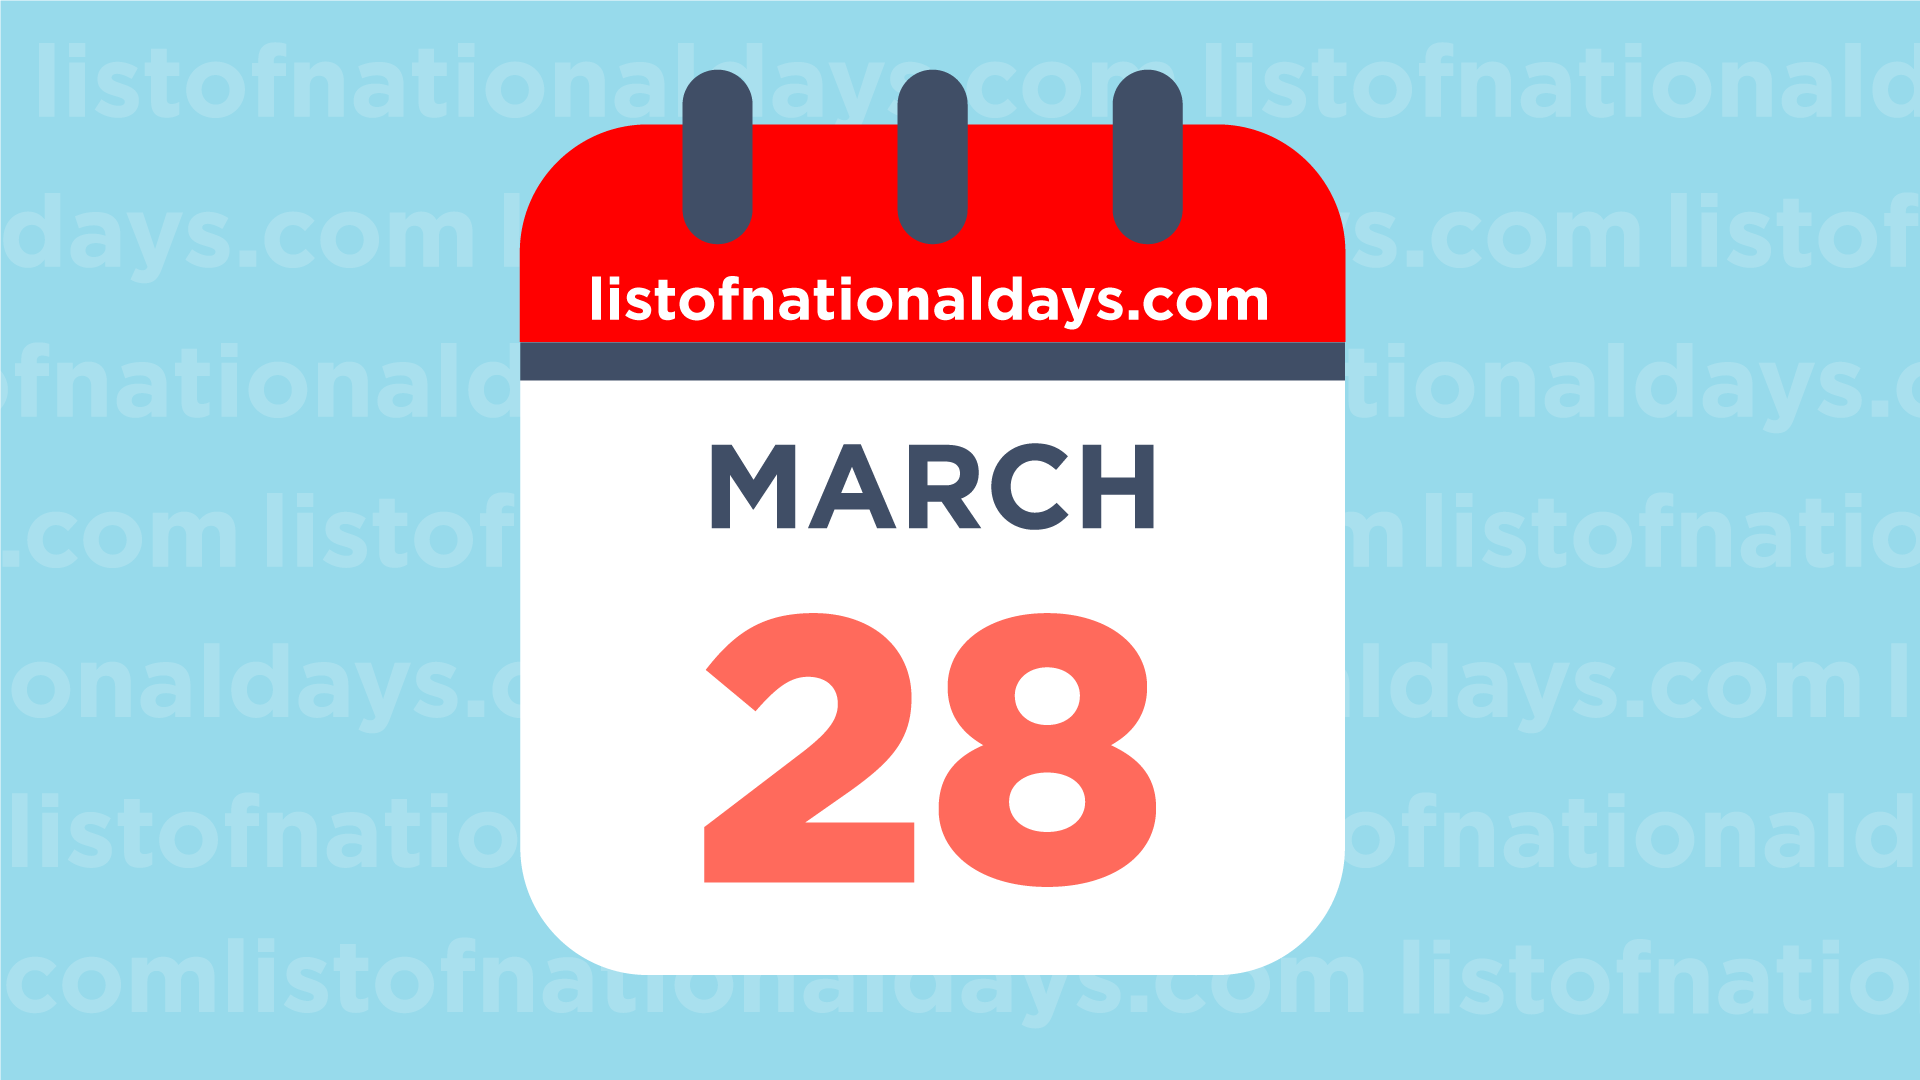 MARCH 28TH: National Holidays, Observances & Famous Birthdays